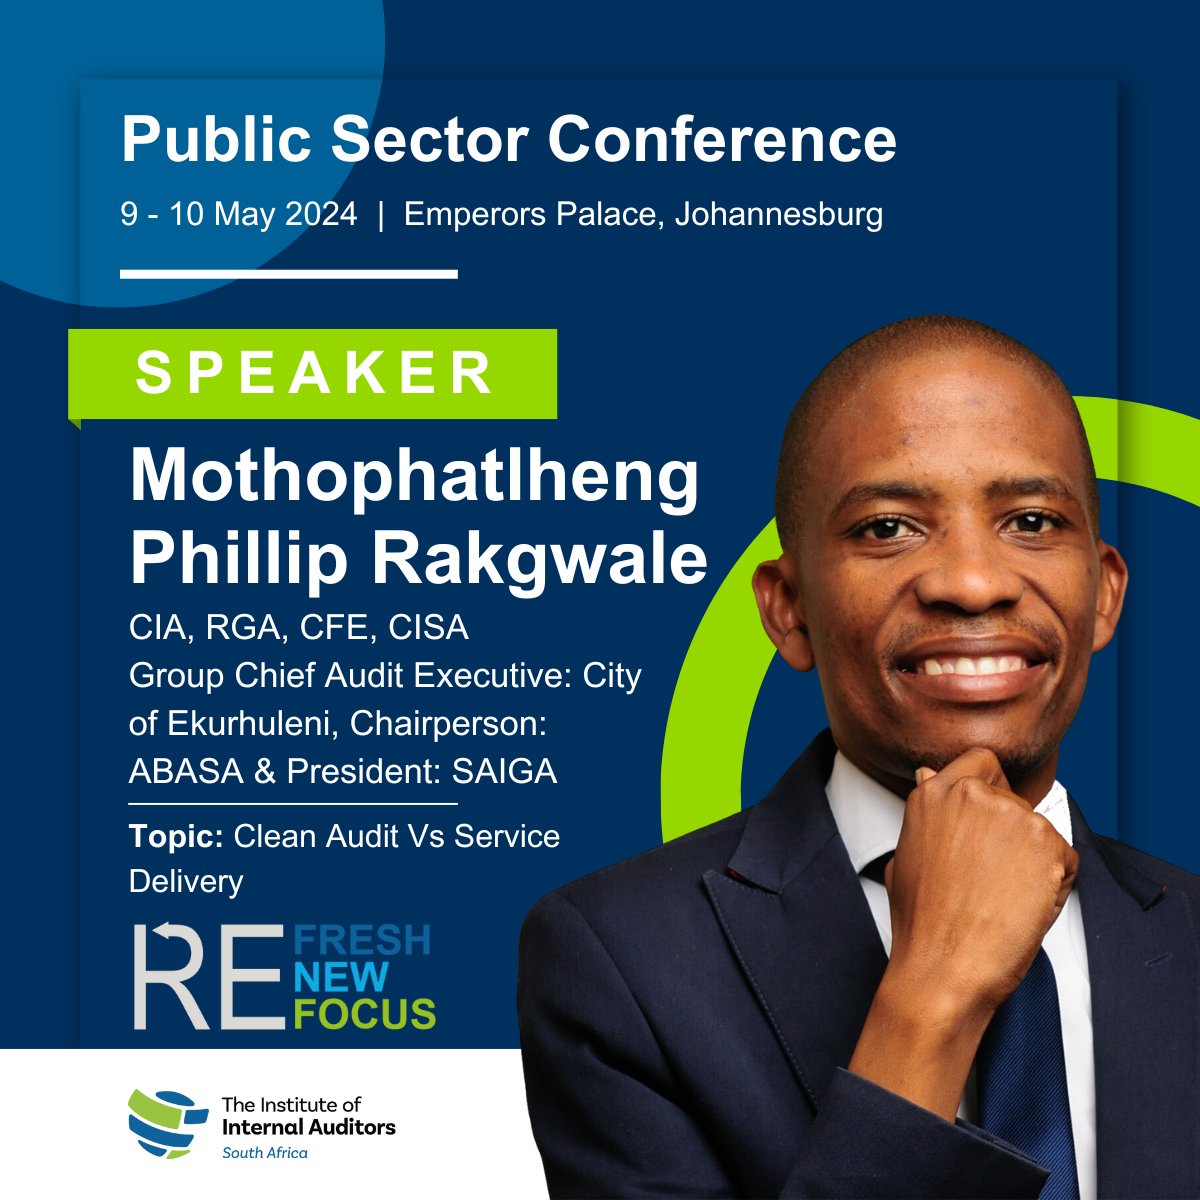 Join us in welcoming Mothophatlheng Rakgwale, a leader and expert in auditing and governance, as our guest speaker at the upcoming conference 9 - 10 May 2024 at Emperors Palace, Jhb!

Register TODAY at tinyurl.com/59vtknbf 

#publicsectorconference #audit #governance  #iiasa